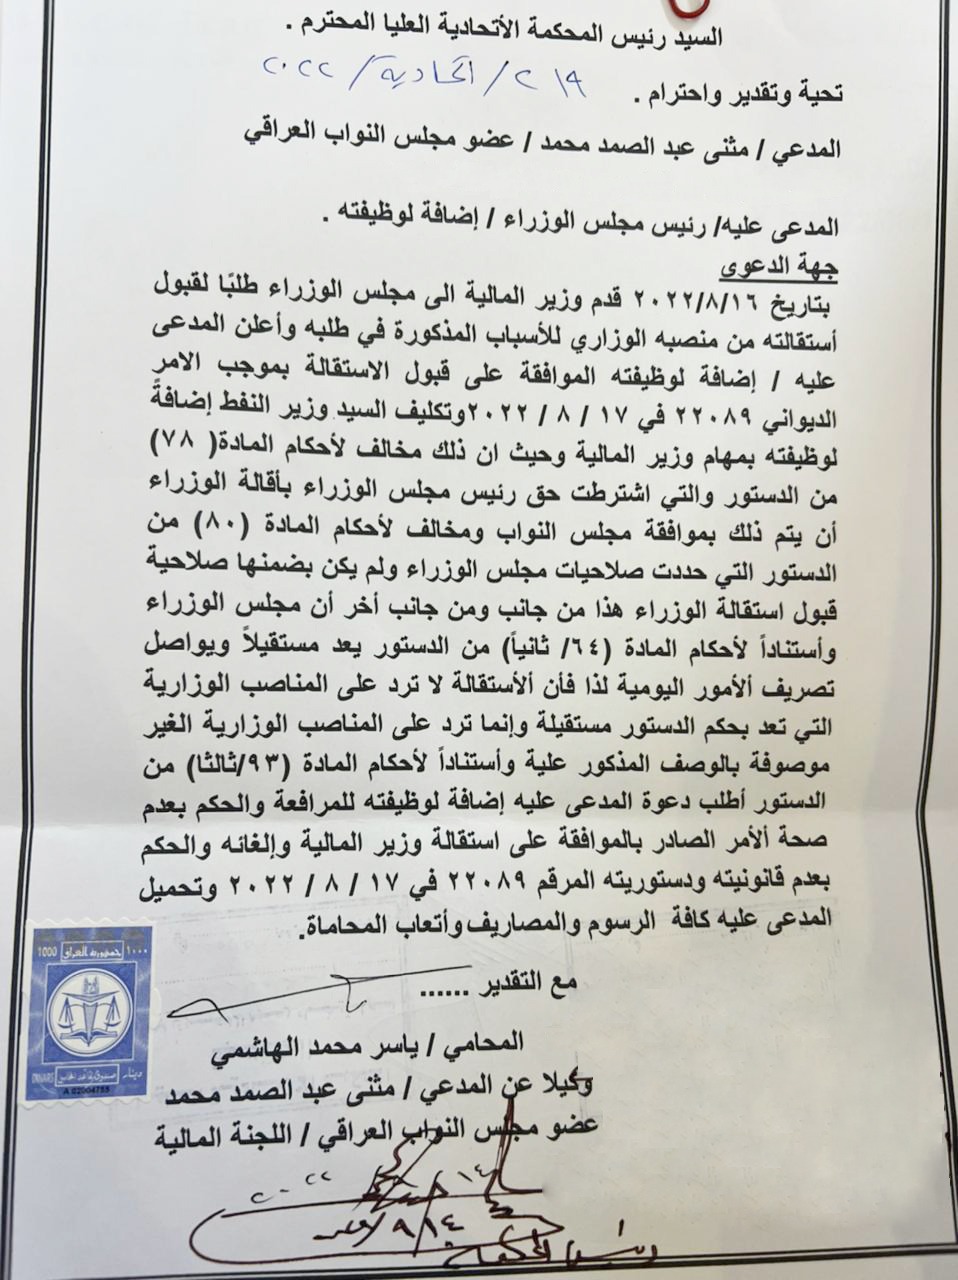 Document .. a parliamentarian challenges Al-Kazemi's decision to accept the resignation of the Minister of Finance